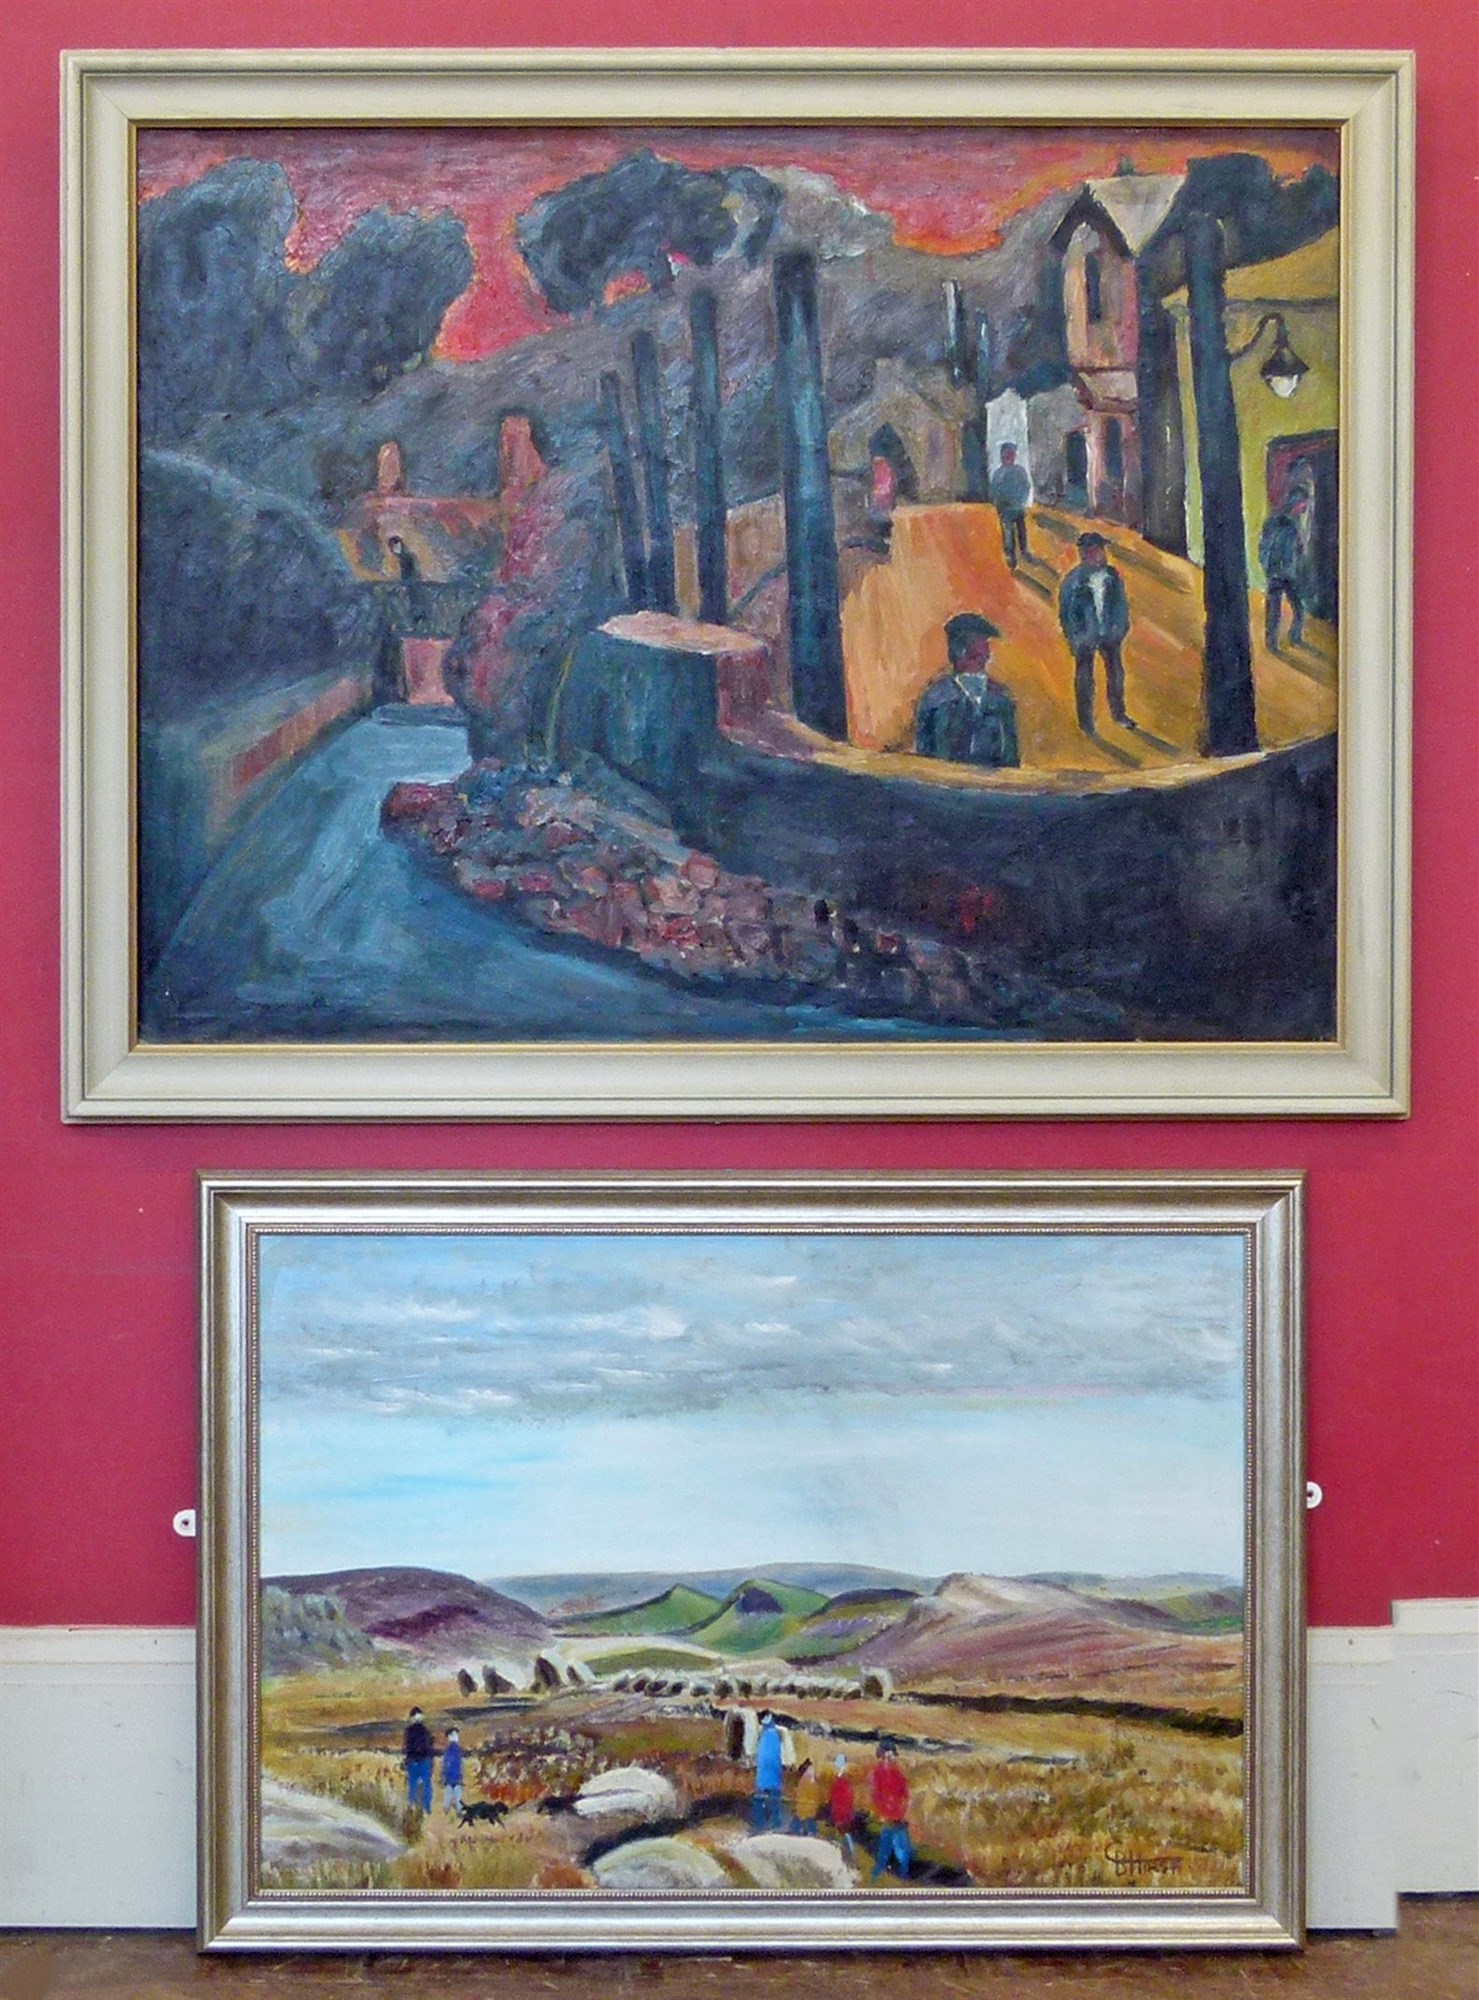 After Josef Herman, "Welsh Mining Village", oil on canvas together with another by C.B. Hirst, "